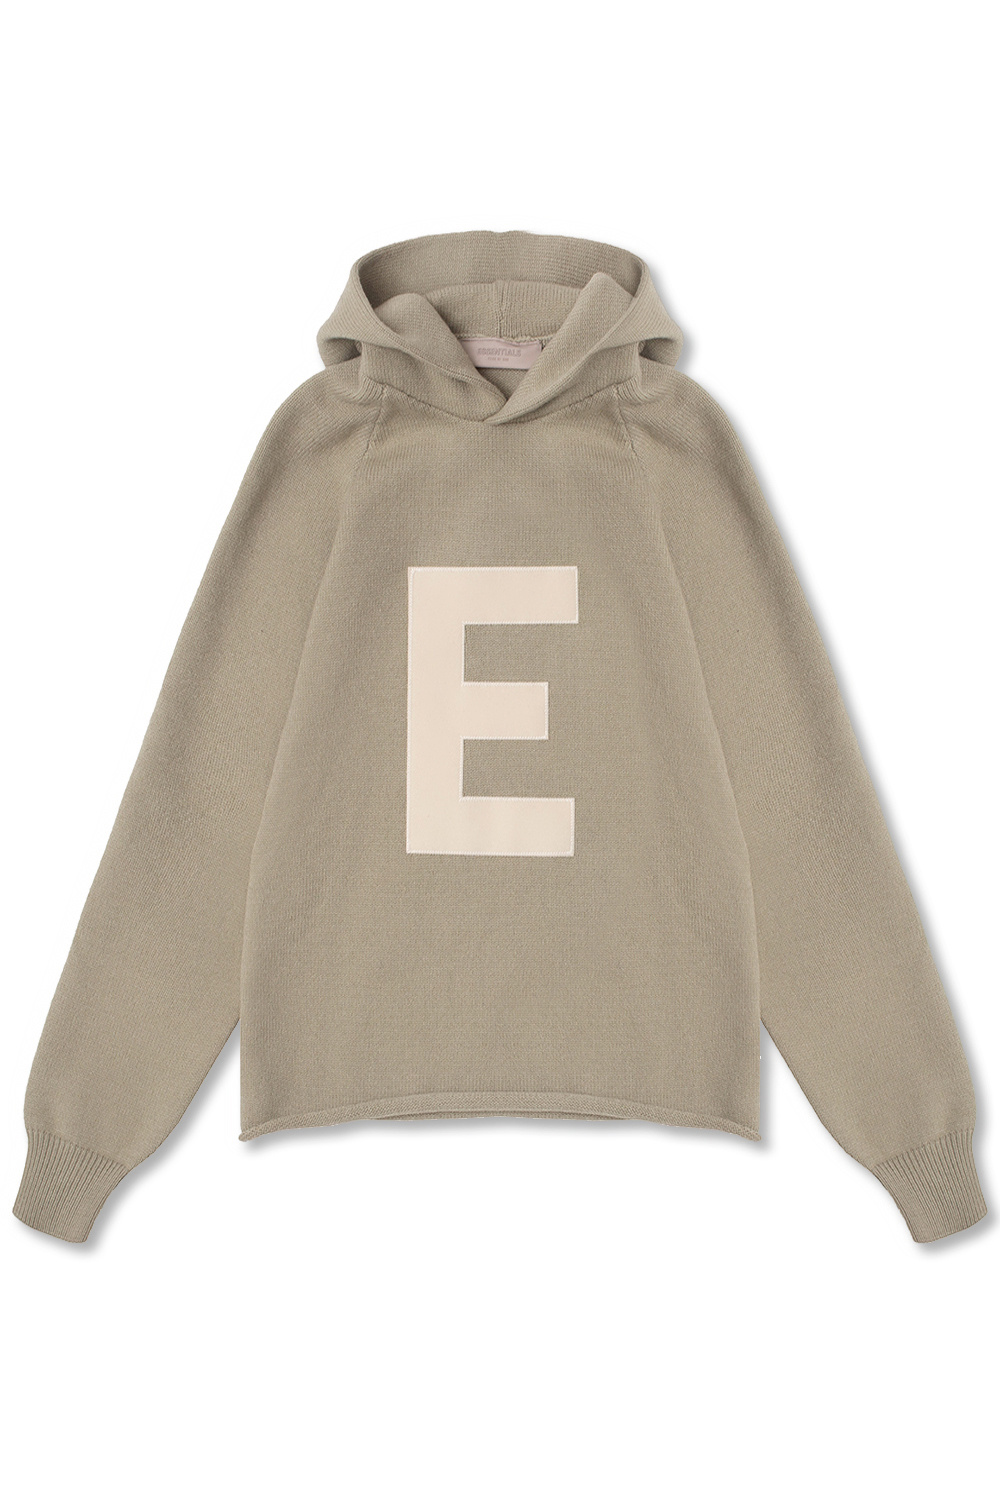 Fear Of God Essentials Kids Hooded make sweater